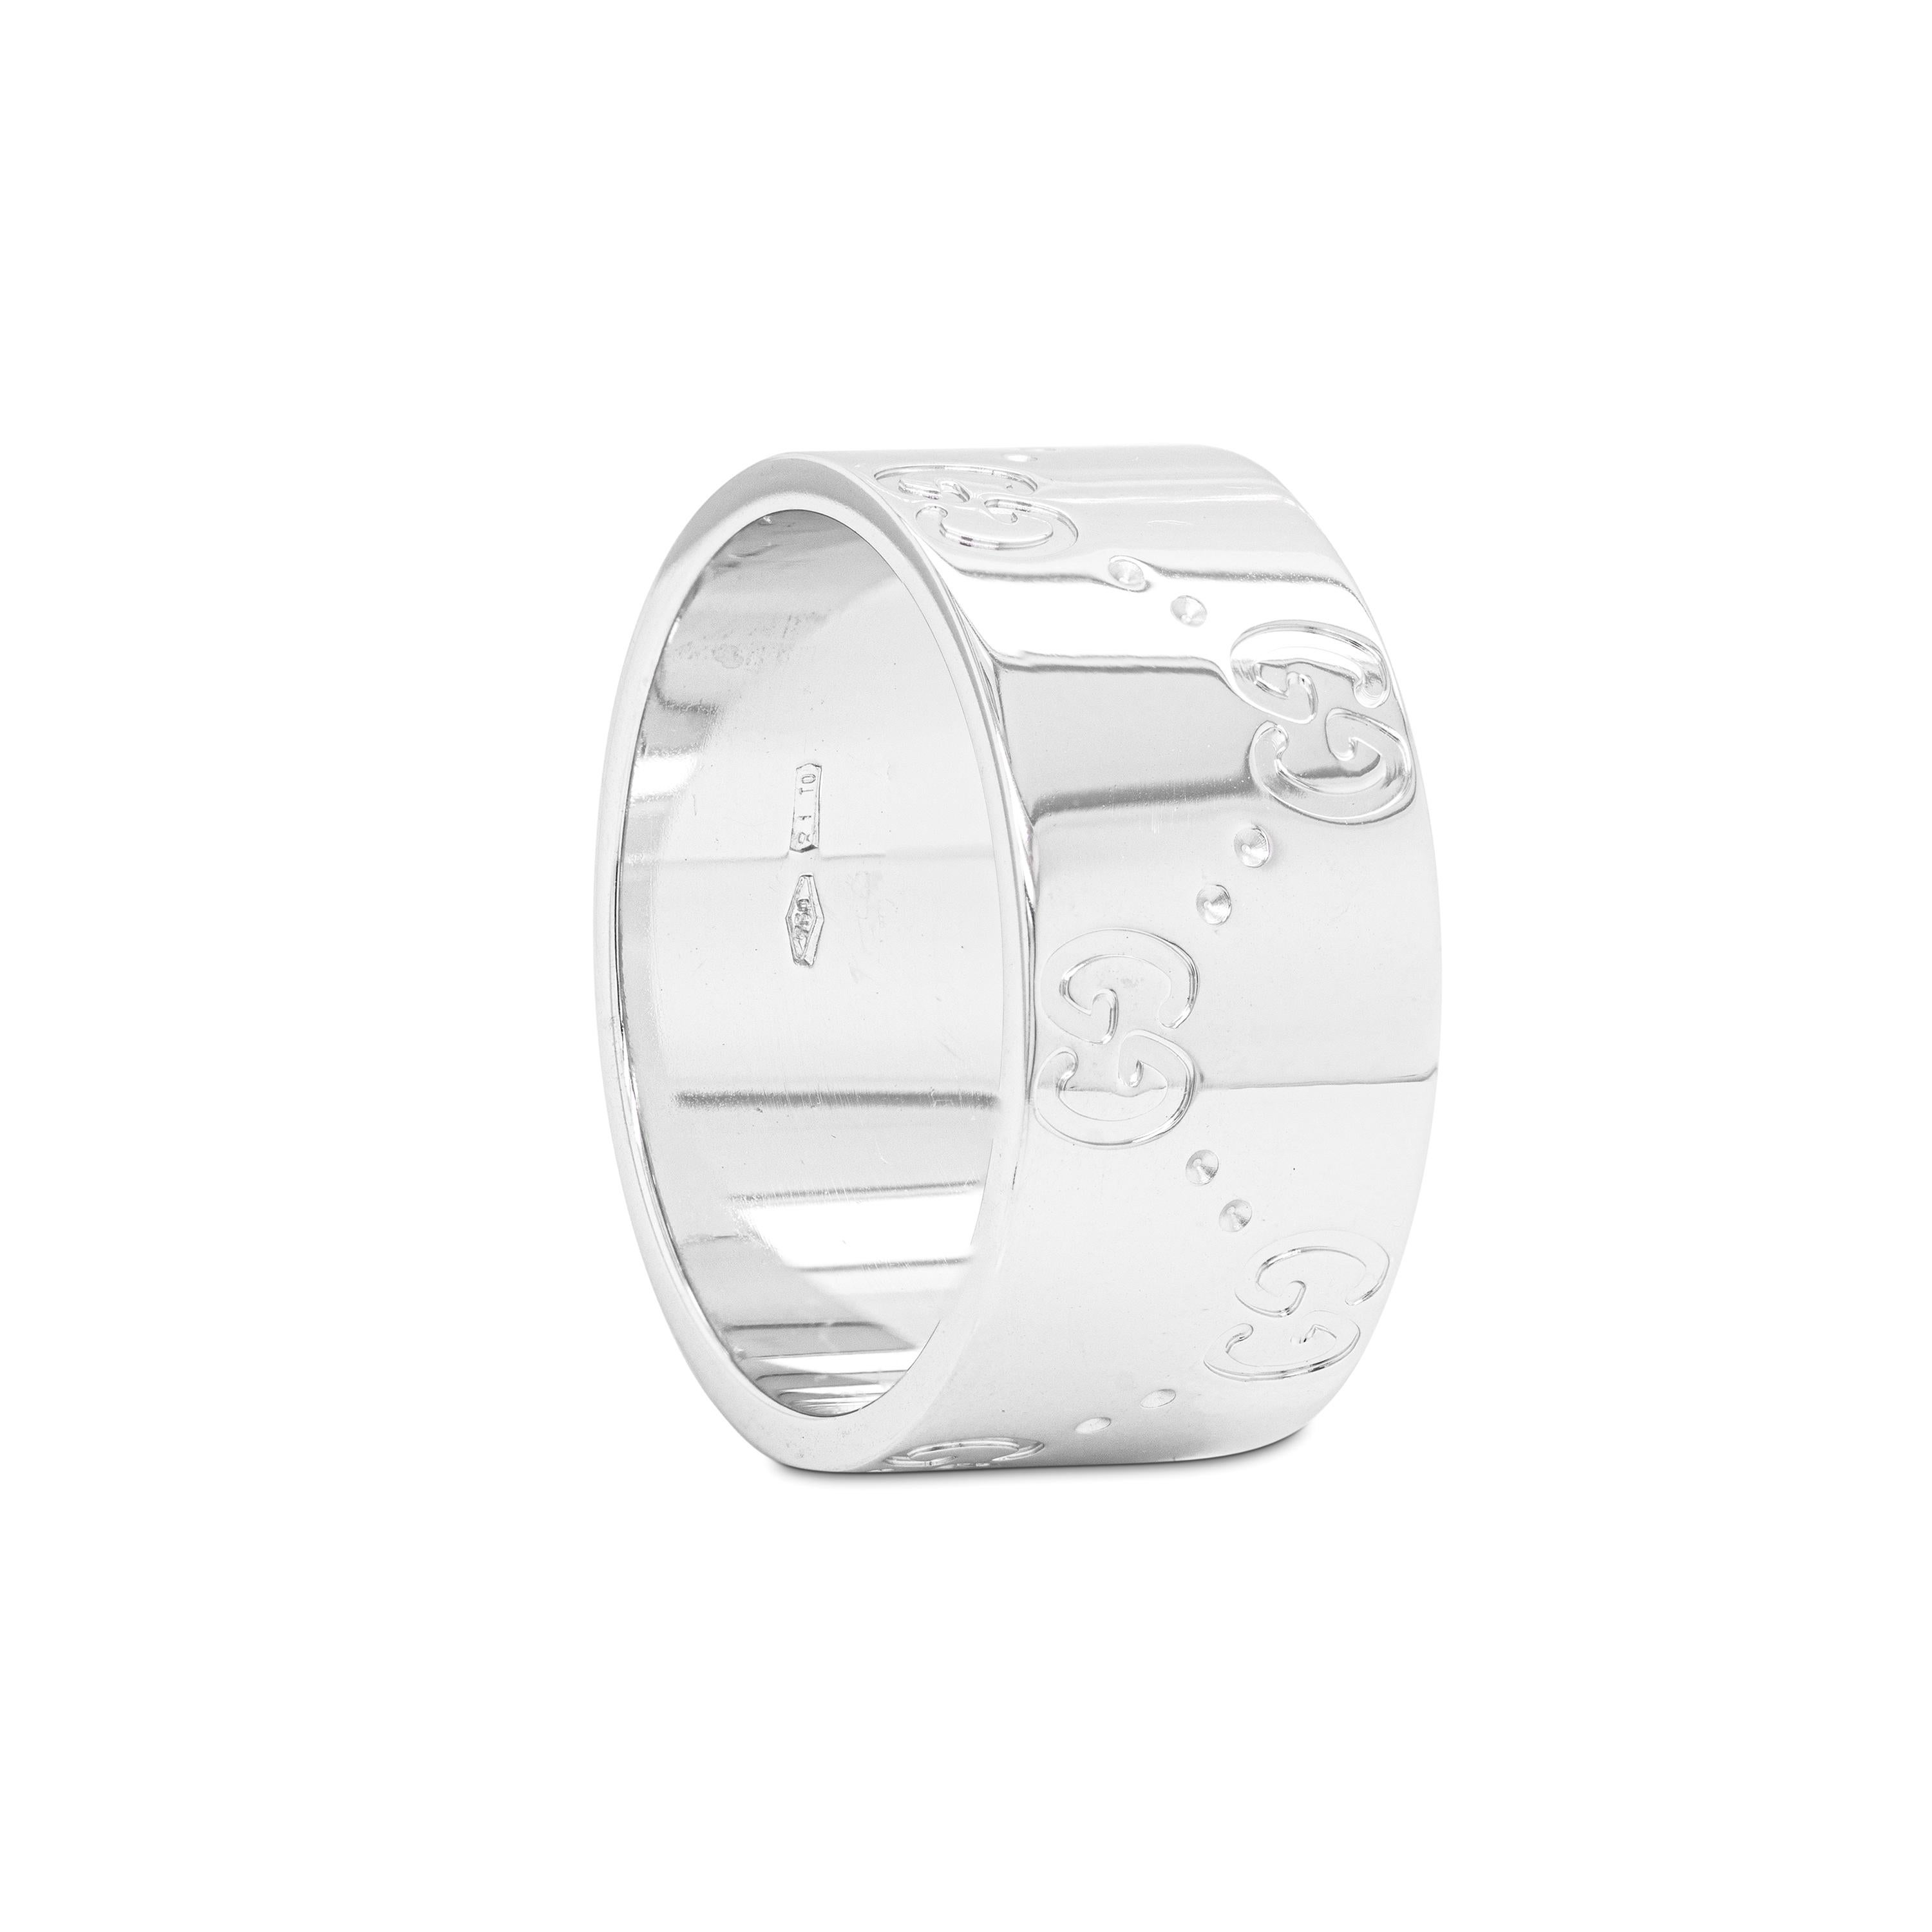 This gorgeous ring by the luxury fashion house Gucci from their 'Icon' Collection is crafted from 18 carat white gold. The ring showcases the emblematic GG monogram throughout the entire band with small embossed circles evenly spaced in between. A